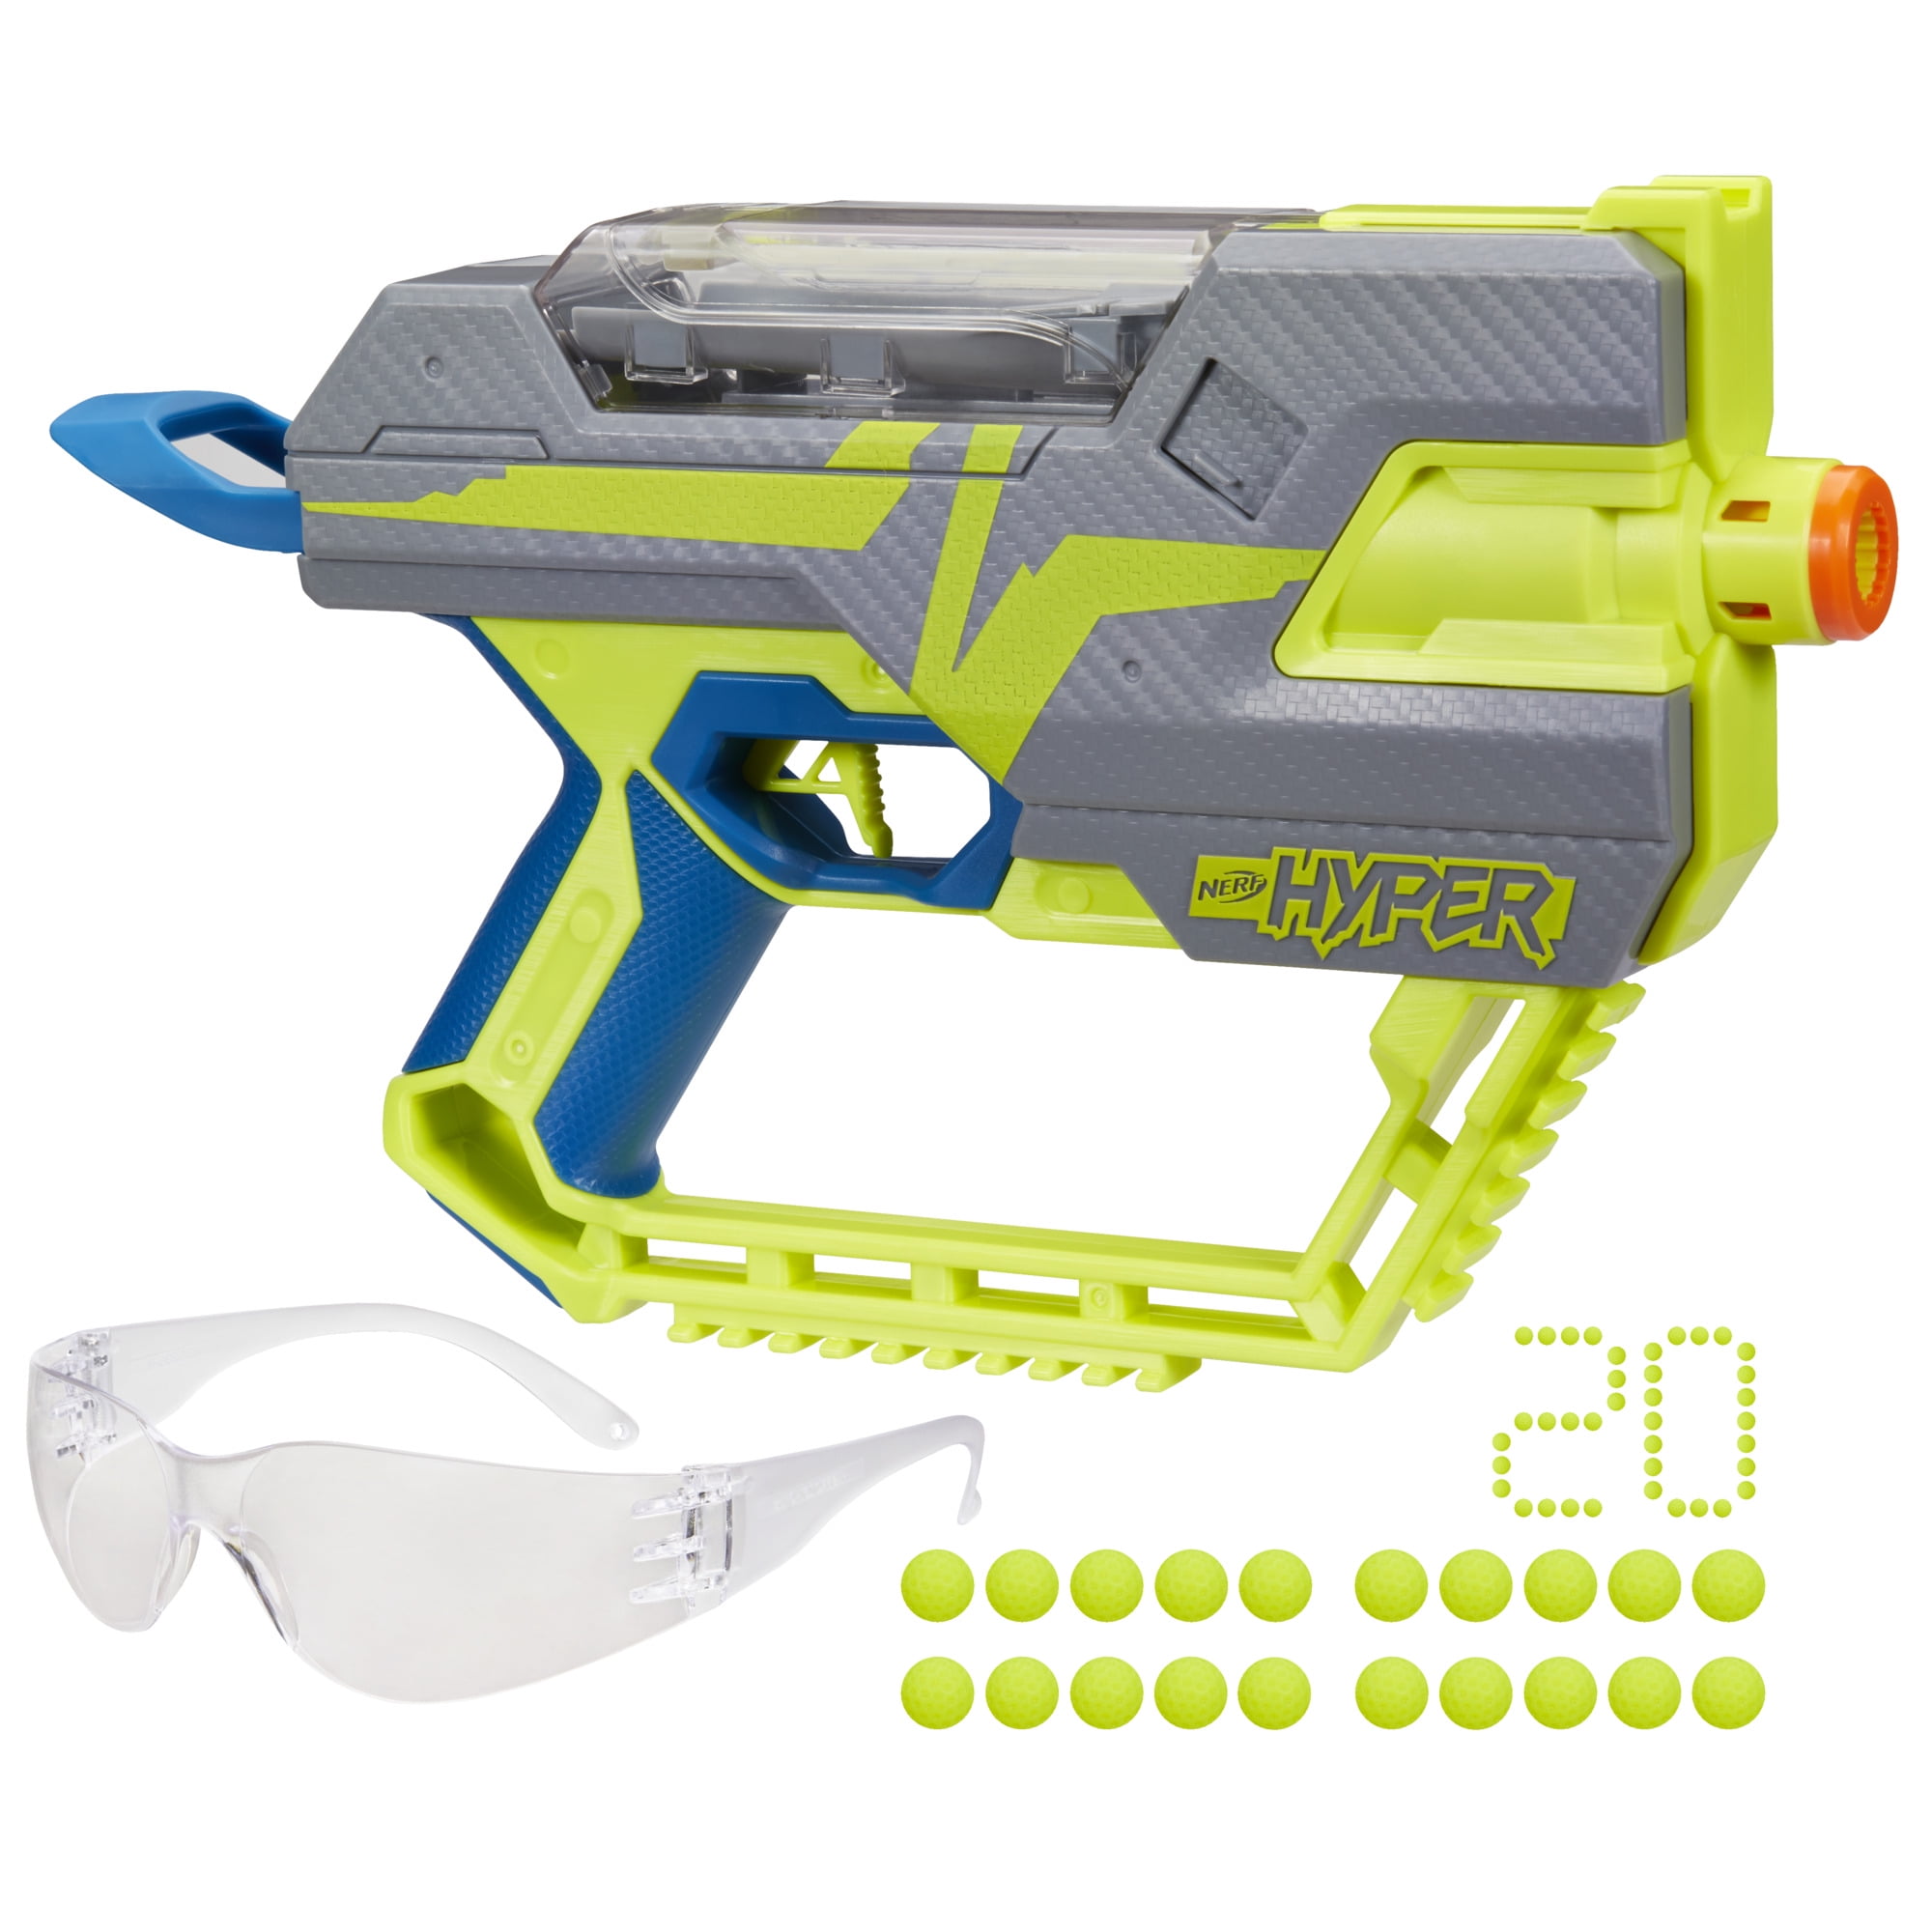 Nerf Hyper Fuel-20 Blaster, 20 Nerf Hyper Rounds, Ages 14+, Only at Walmart